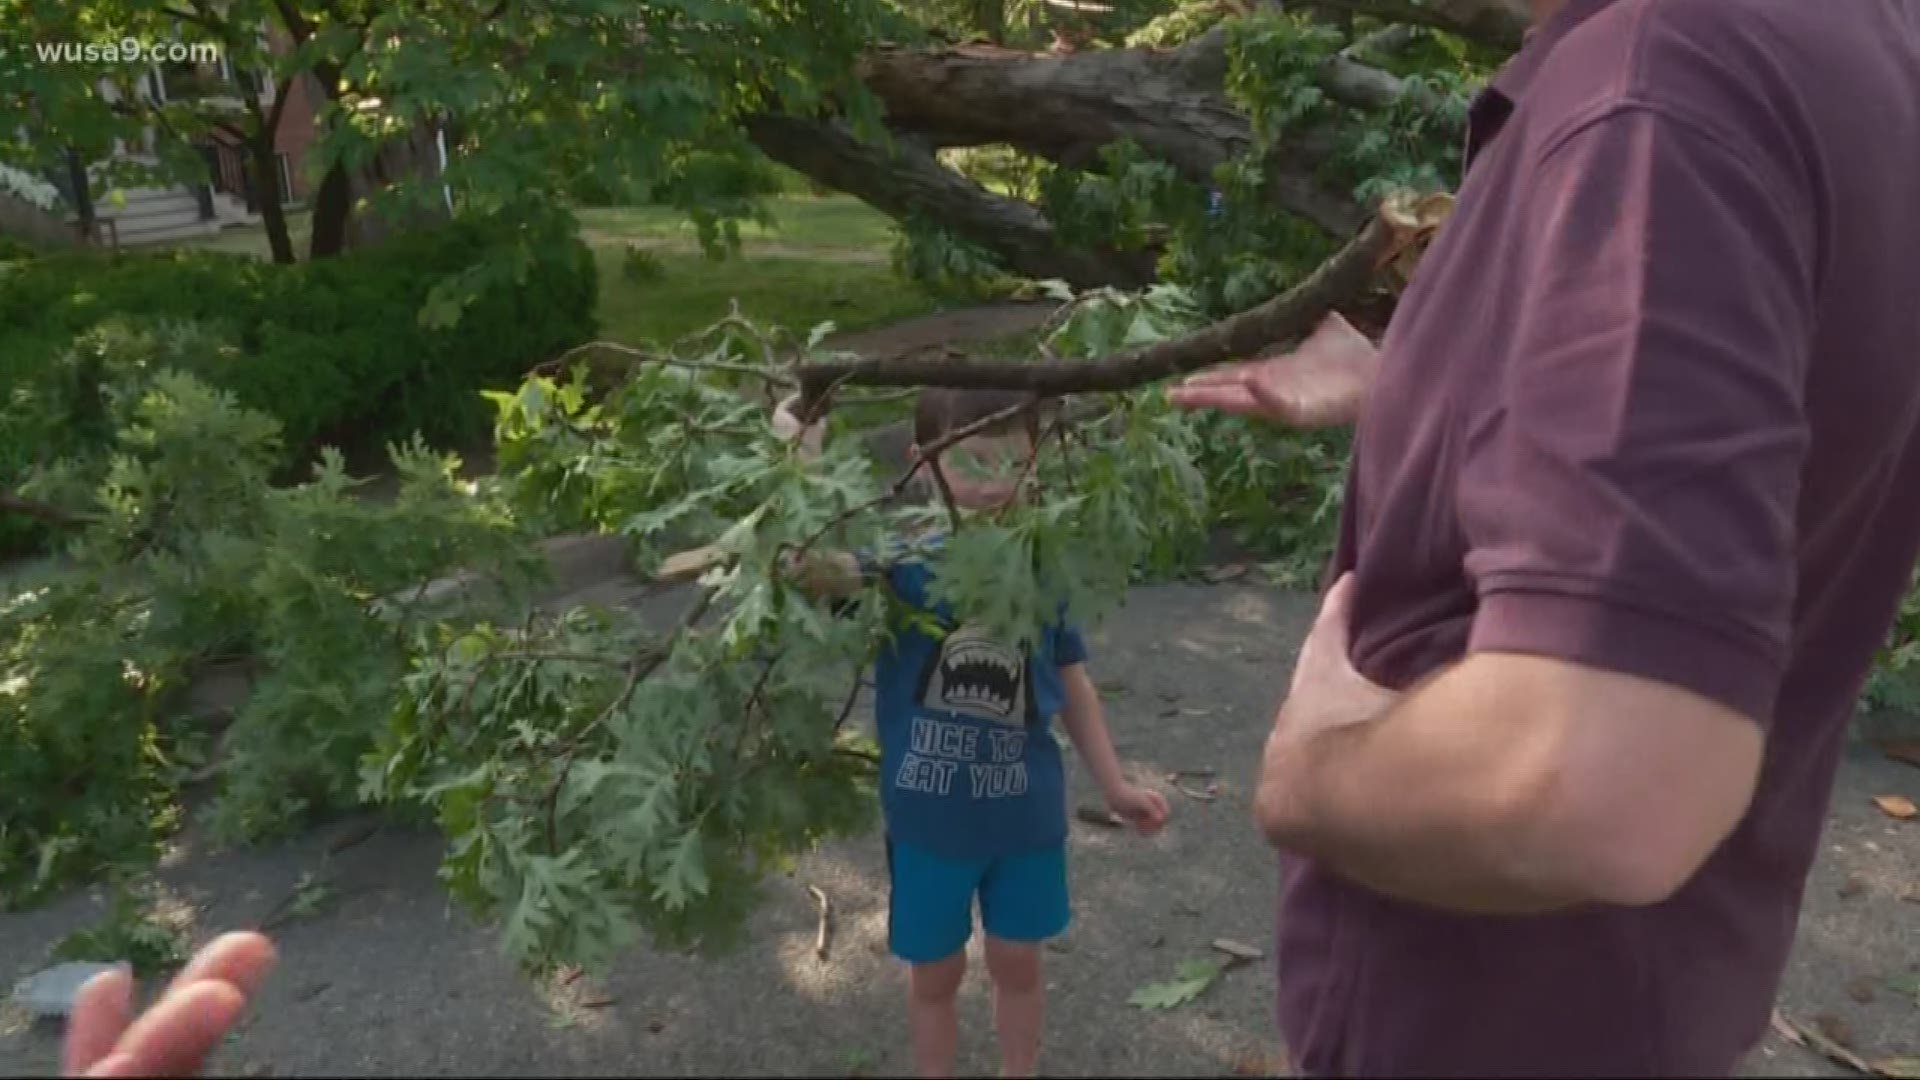 Severe storms rolled through the DMV Thursday afternoon causing damage across the region.